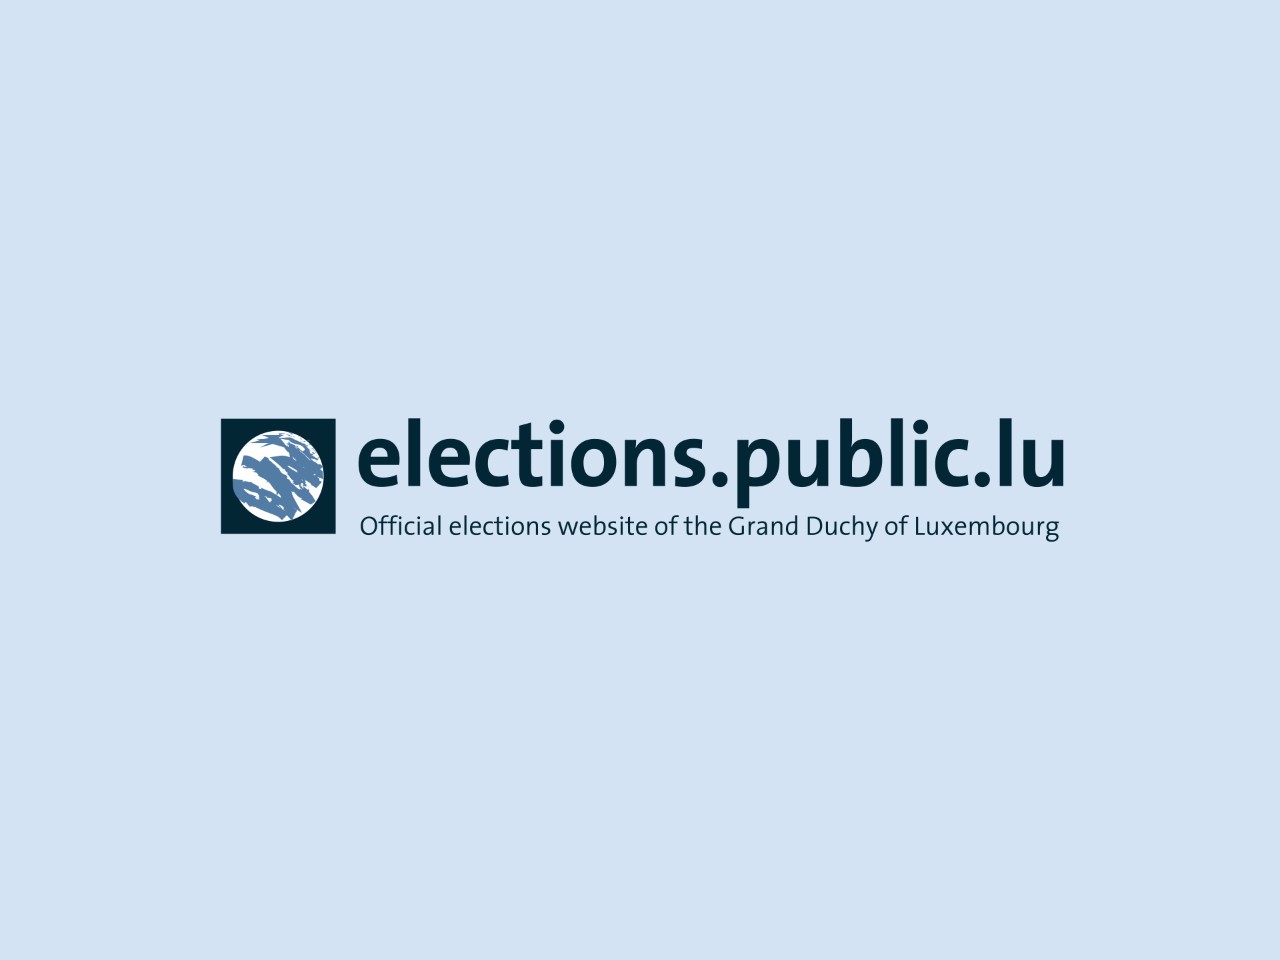 The official website for election results in Luxembourg. - New window